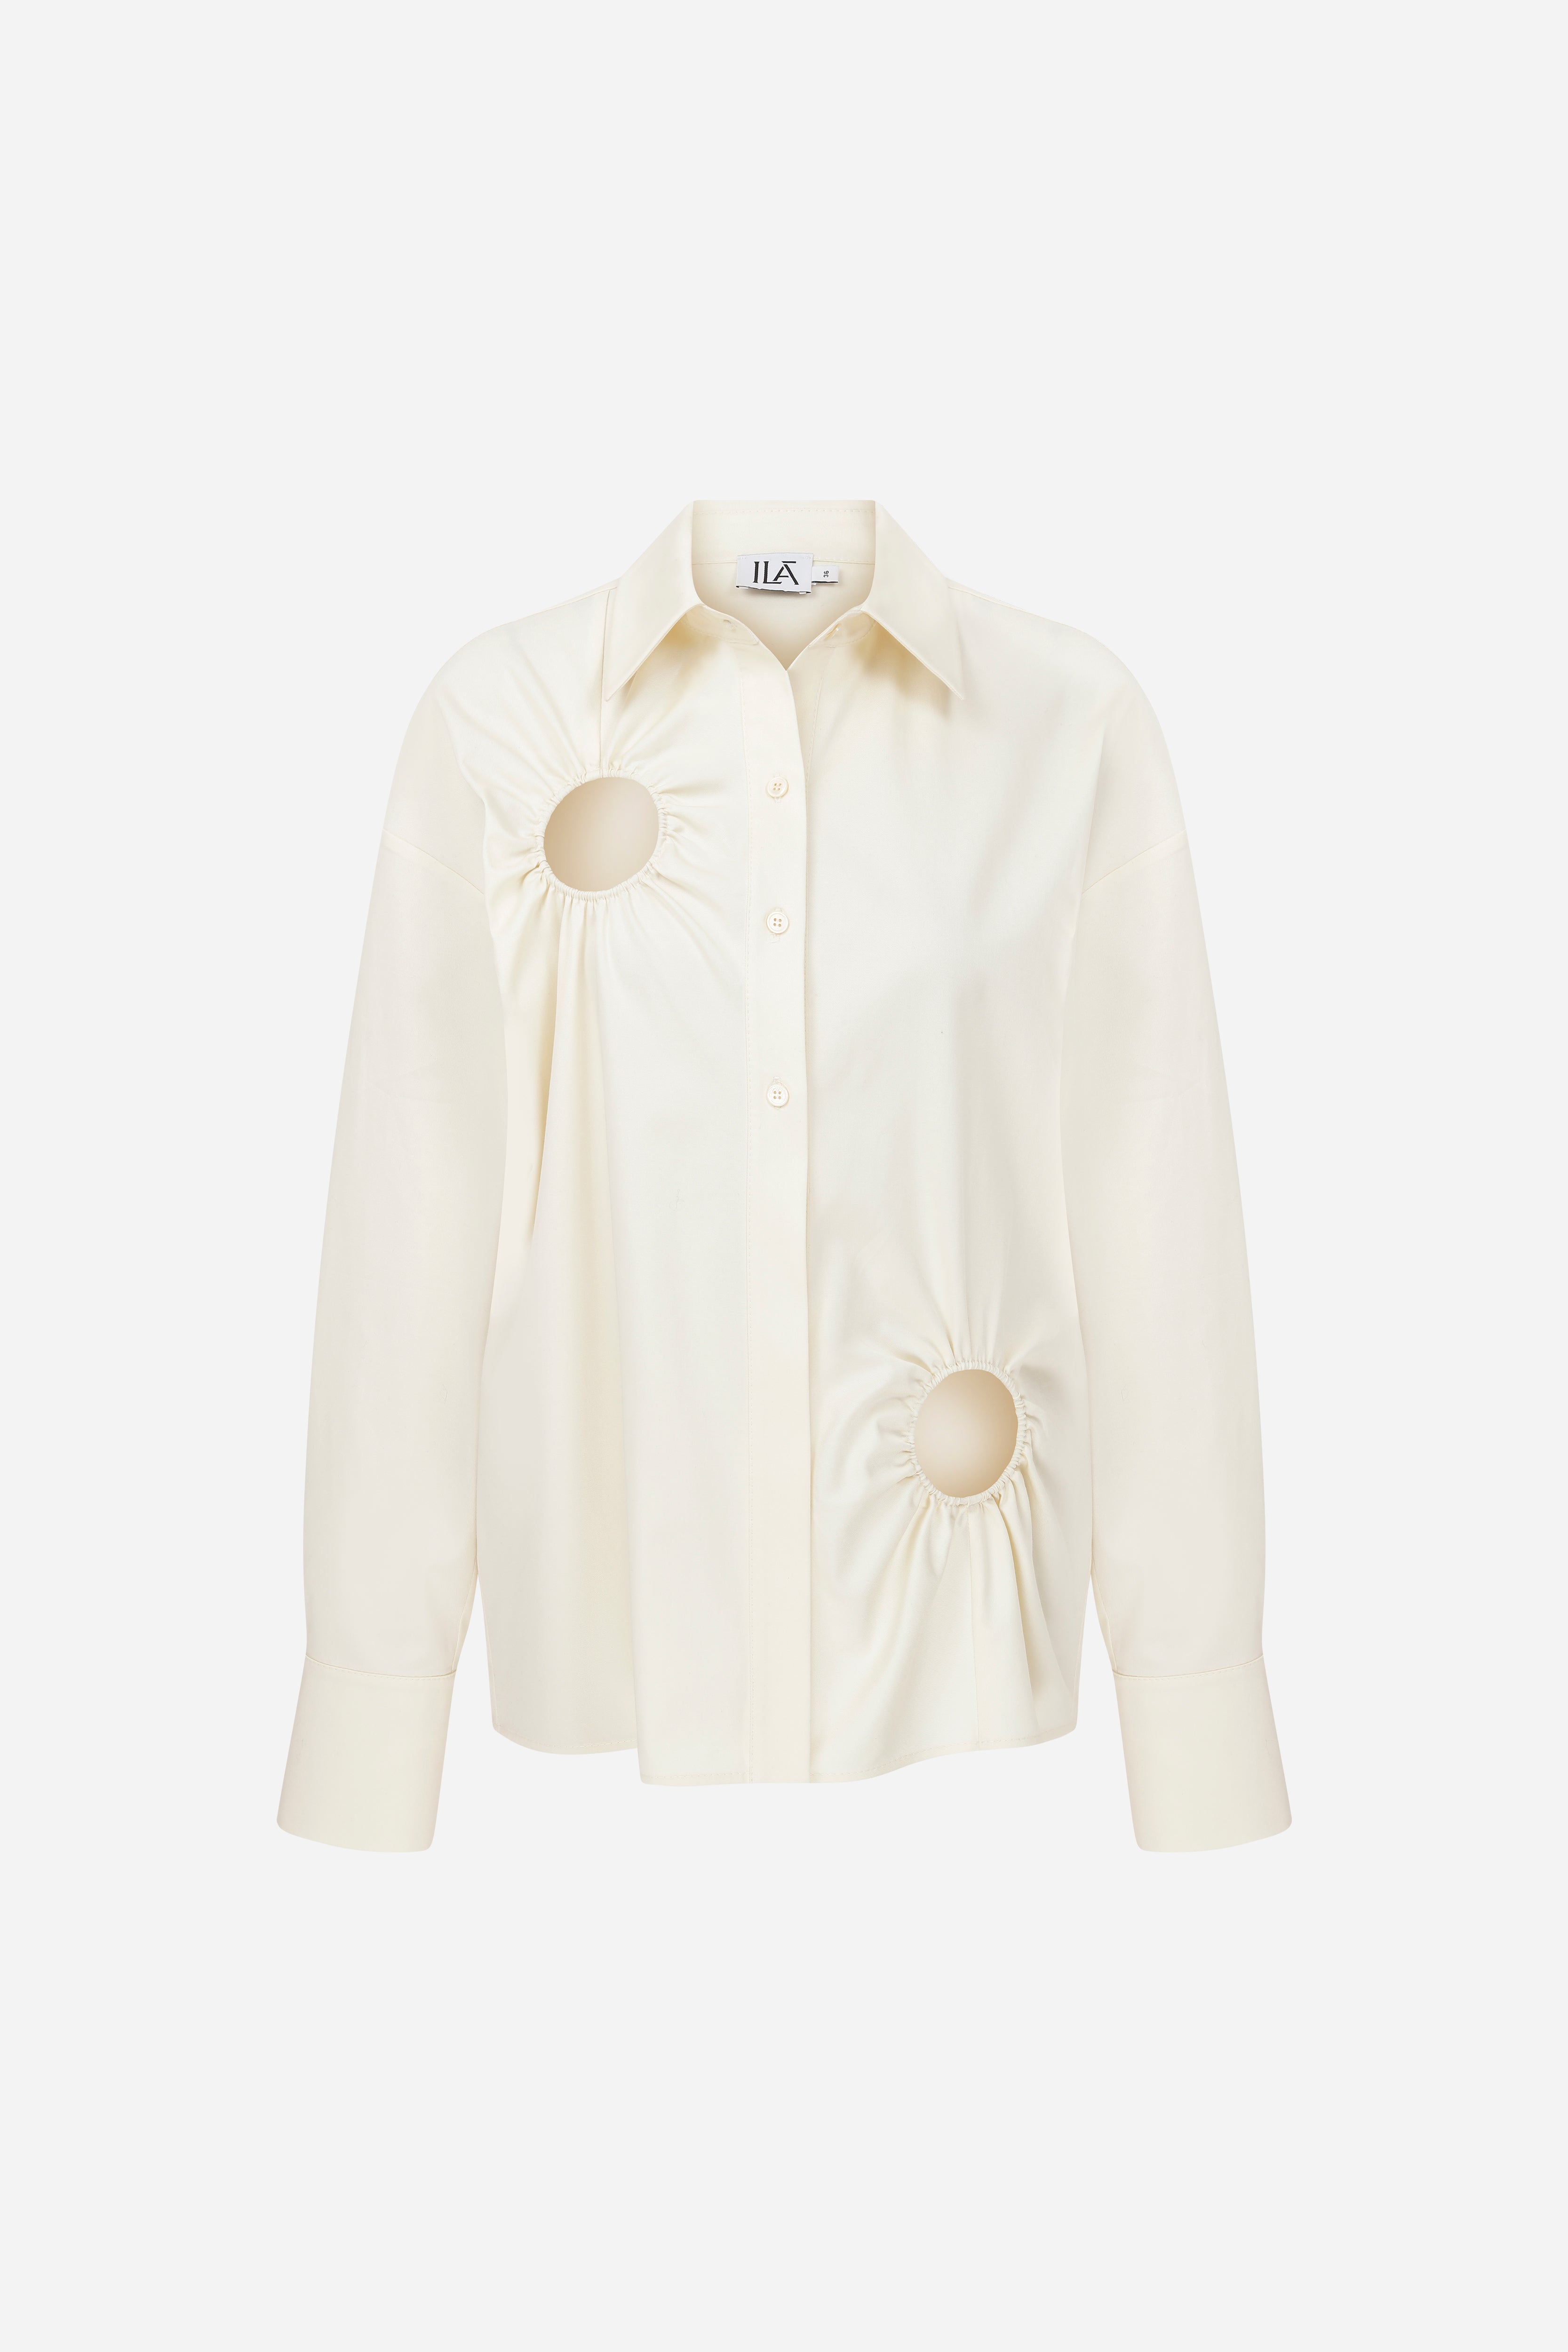 Pavla - Shirt With 2 Ring Cut-Outs